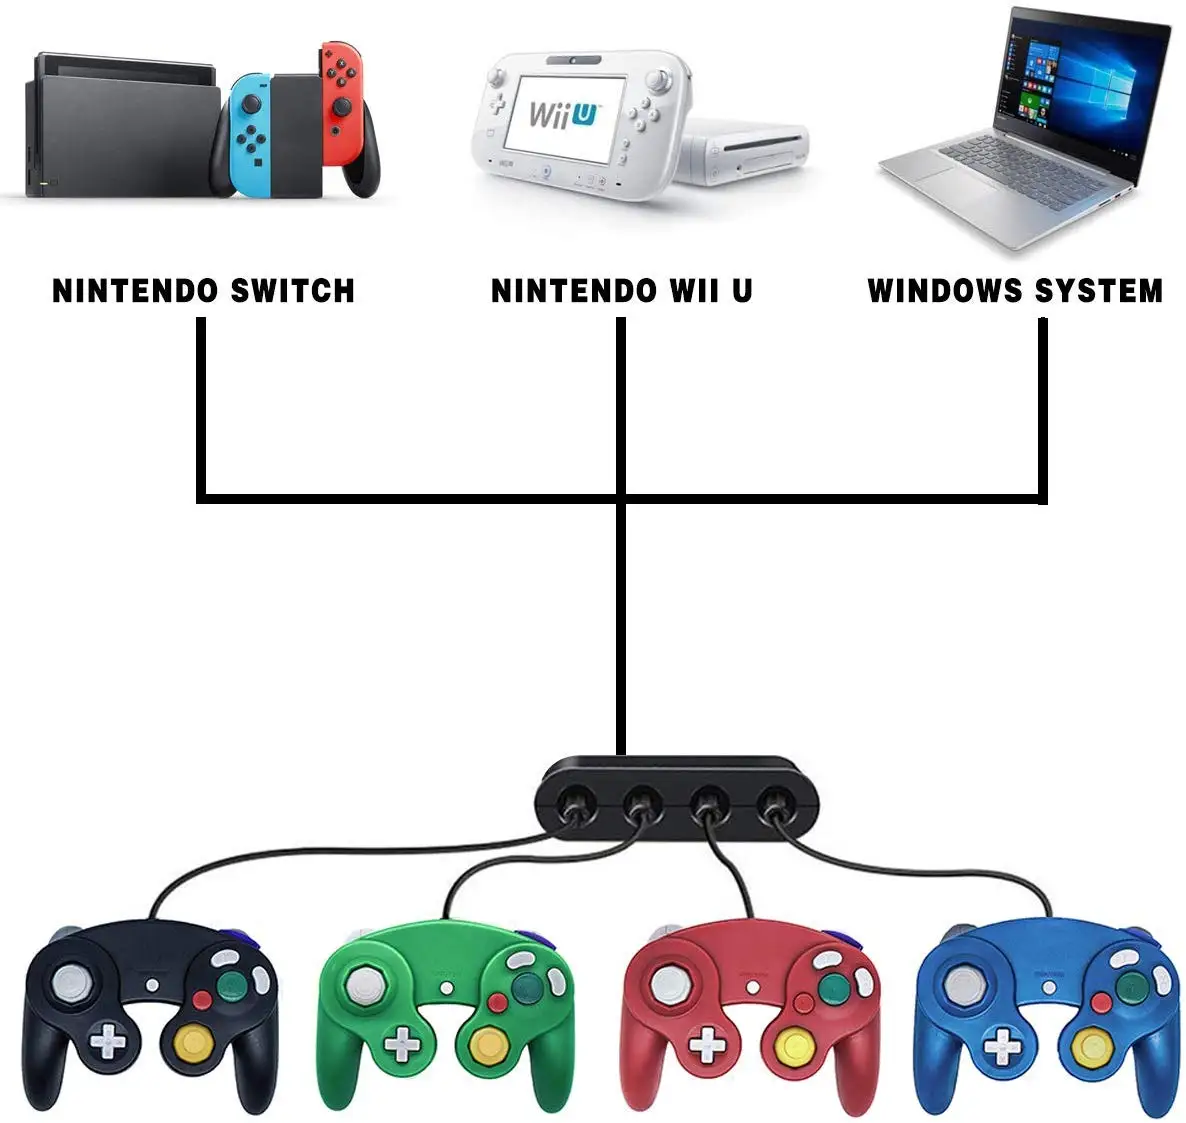 Gamecube Controller Adapter For Super Smash Bros Ultimate Nintendo Switch Wii U Pc Buy Game Controller Accessories For Gc Controller Adapter Converter For Wiiu Pc Usb Best Gc Gamepad To Switch Wii